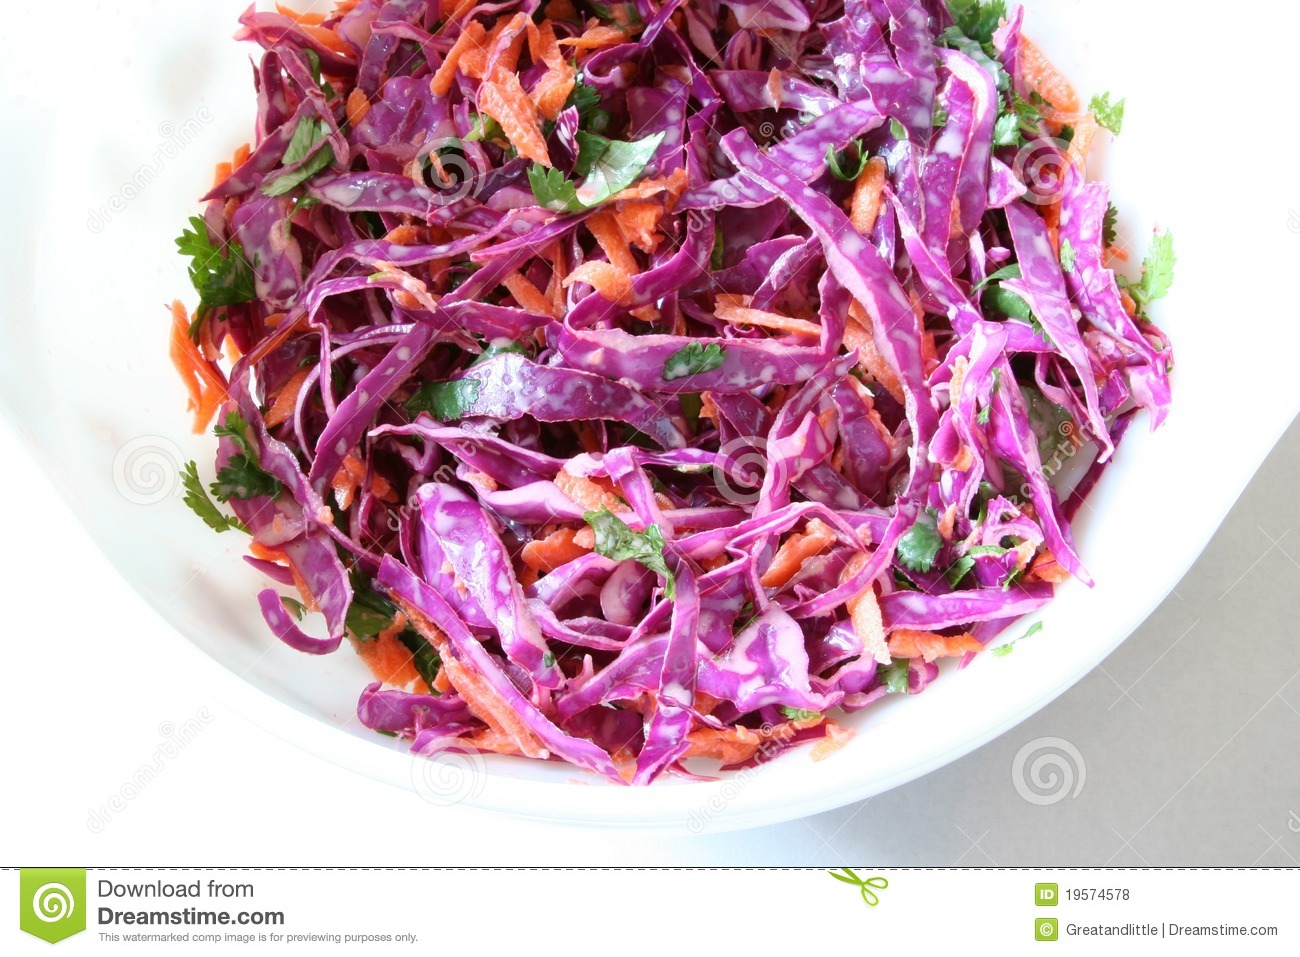 Red Cabbage Cole Slaw Royalty Free Stock Photos   Image  19574578